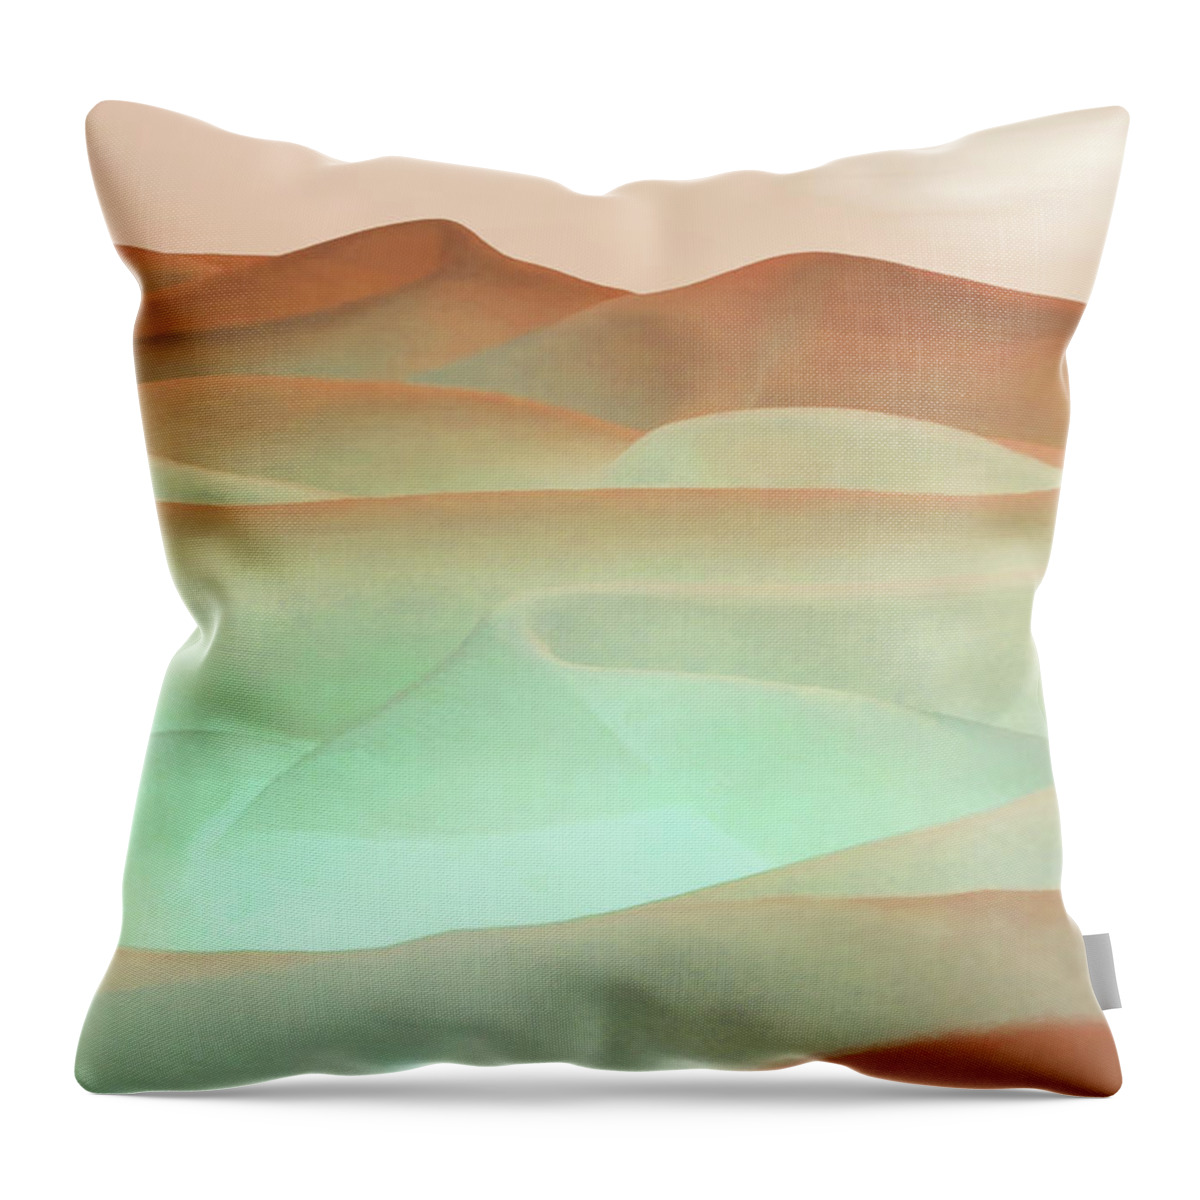 Abstract Throw Pillow featuring the digital art Abstract Terracotta Landscape by Deborah Smith